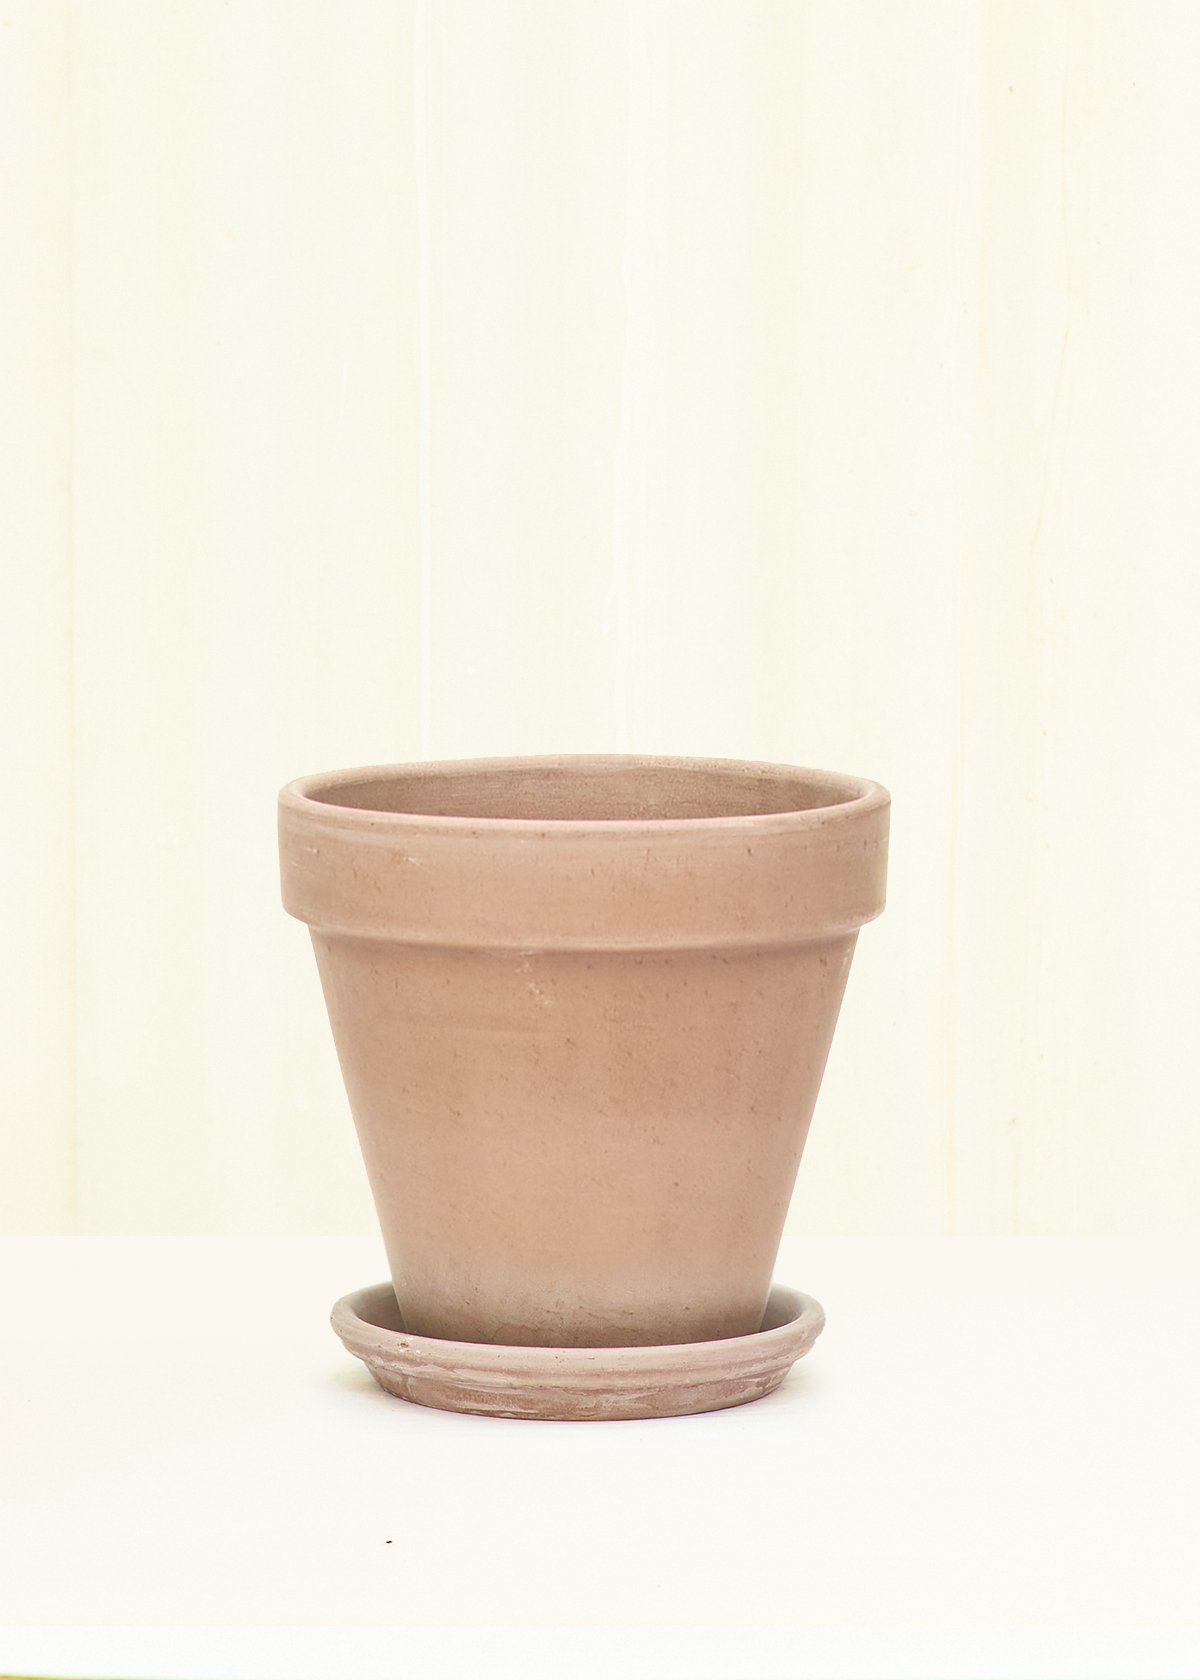 Standard Terracotta Planter with Tray